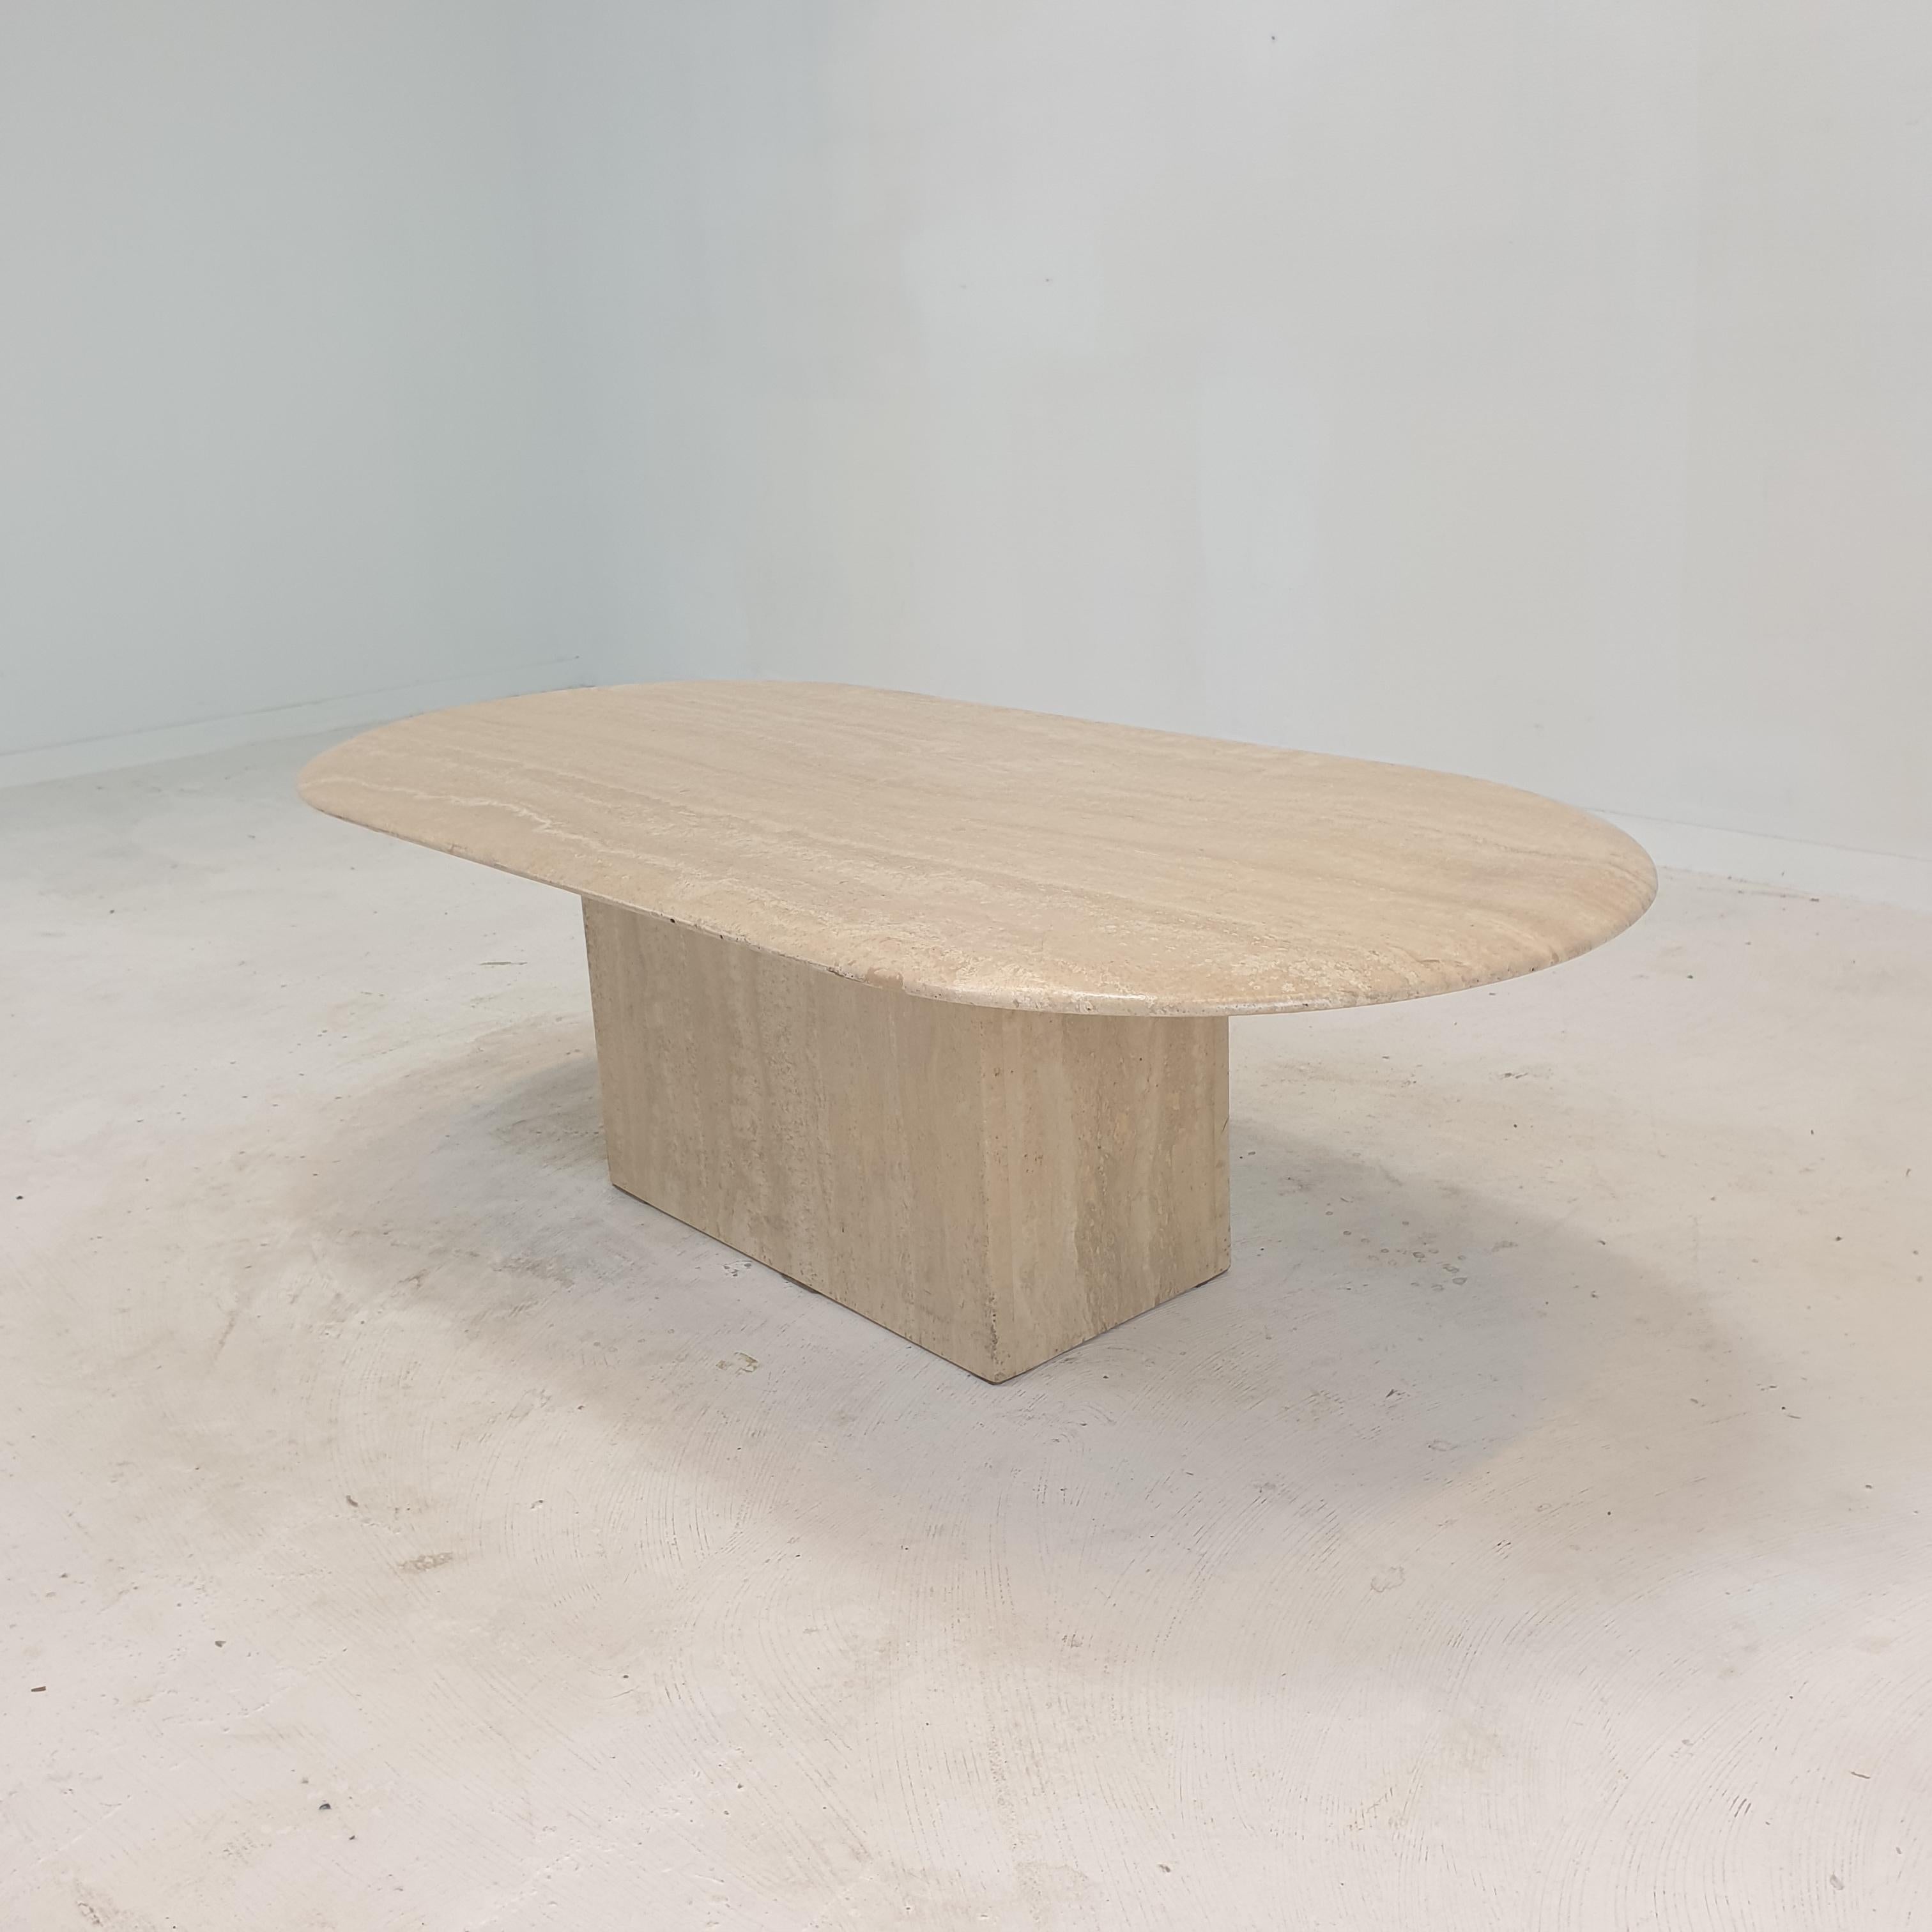 Late 20th Century Italian Oval Coffee Table in Travertine, 1980s For Sale